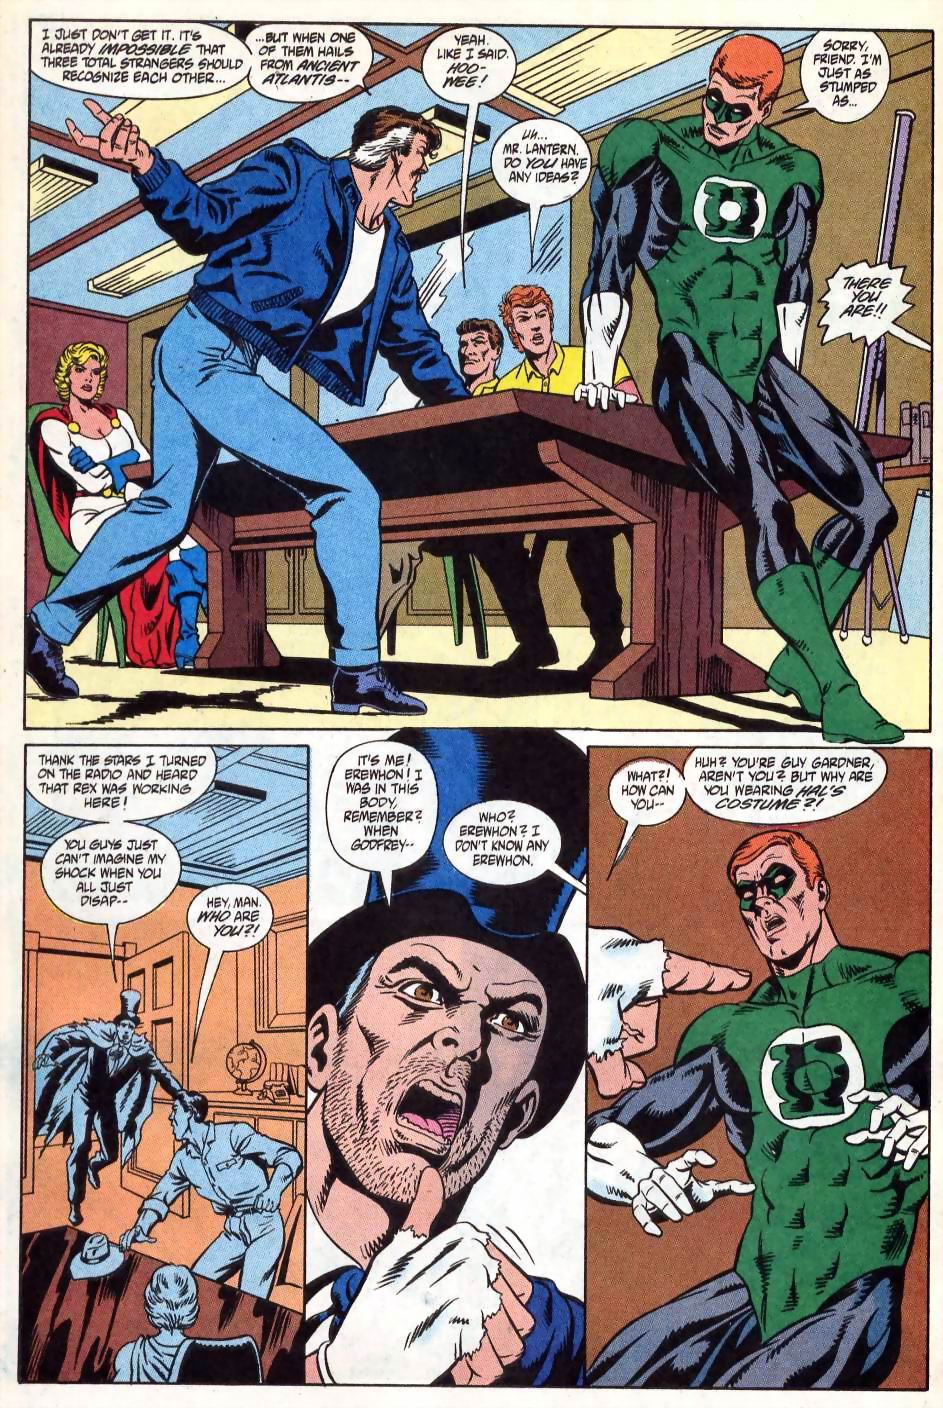 Justice League International (1993) 59 Page 11